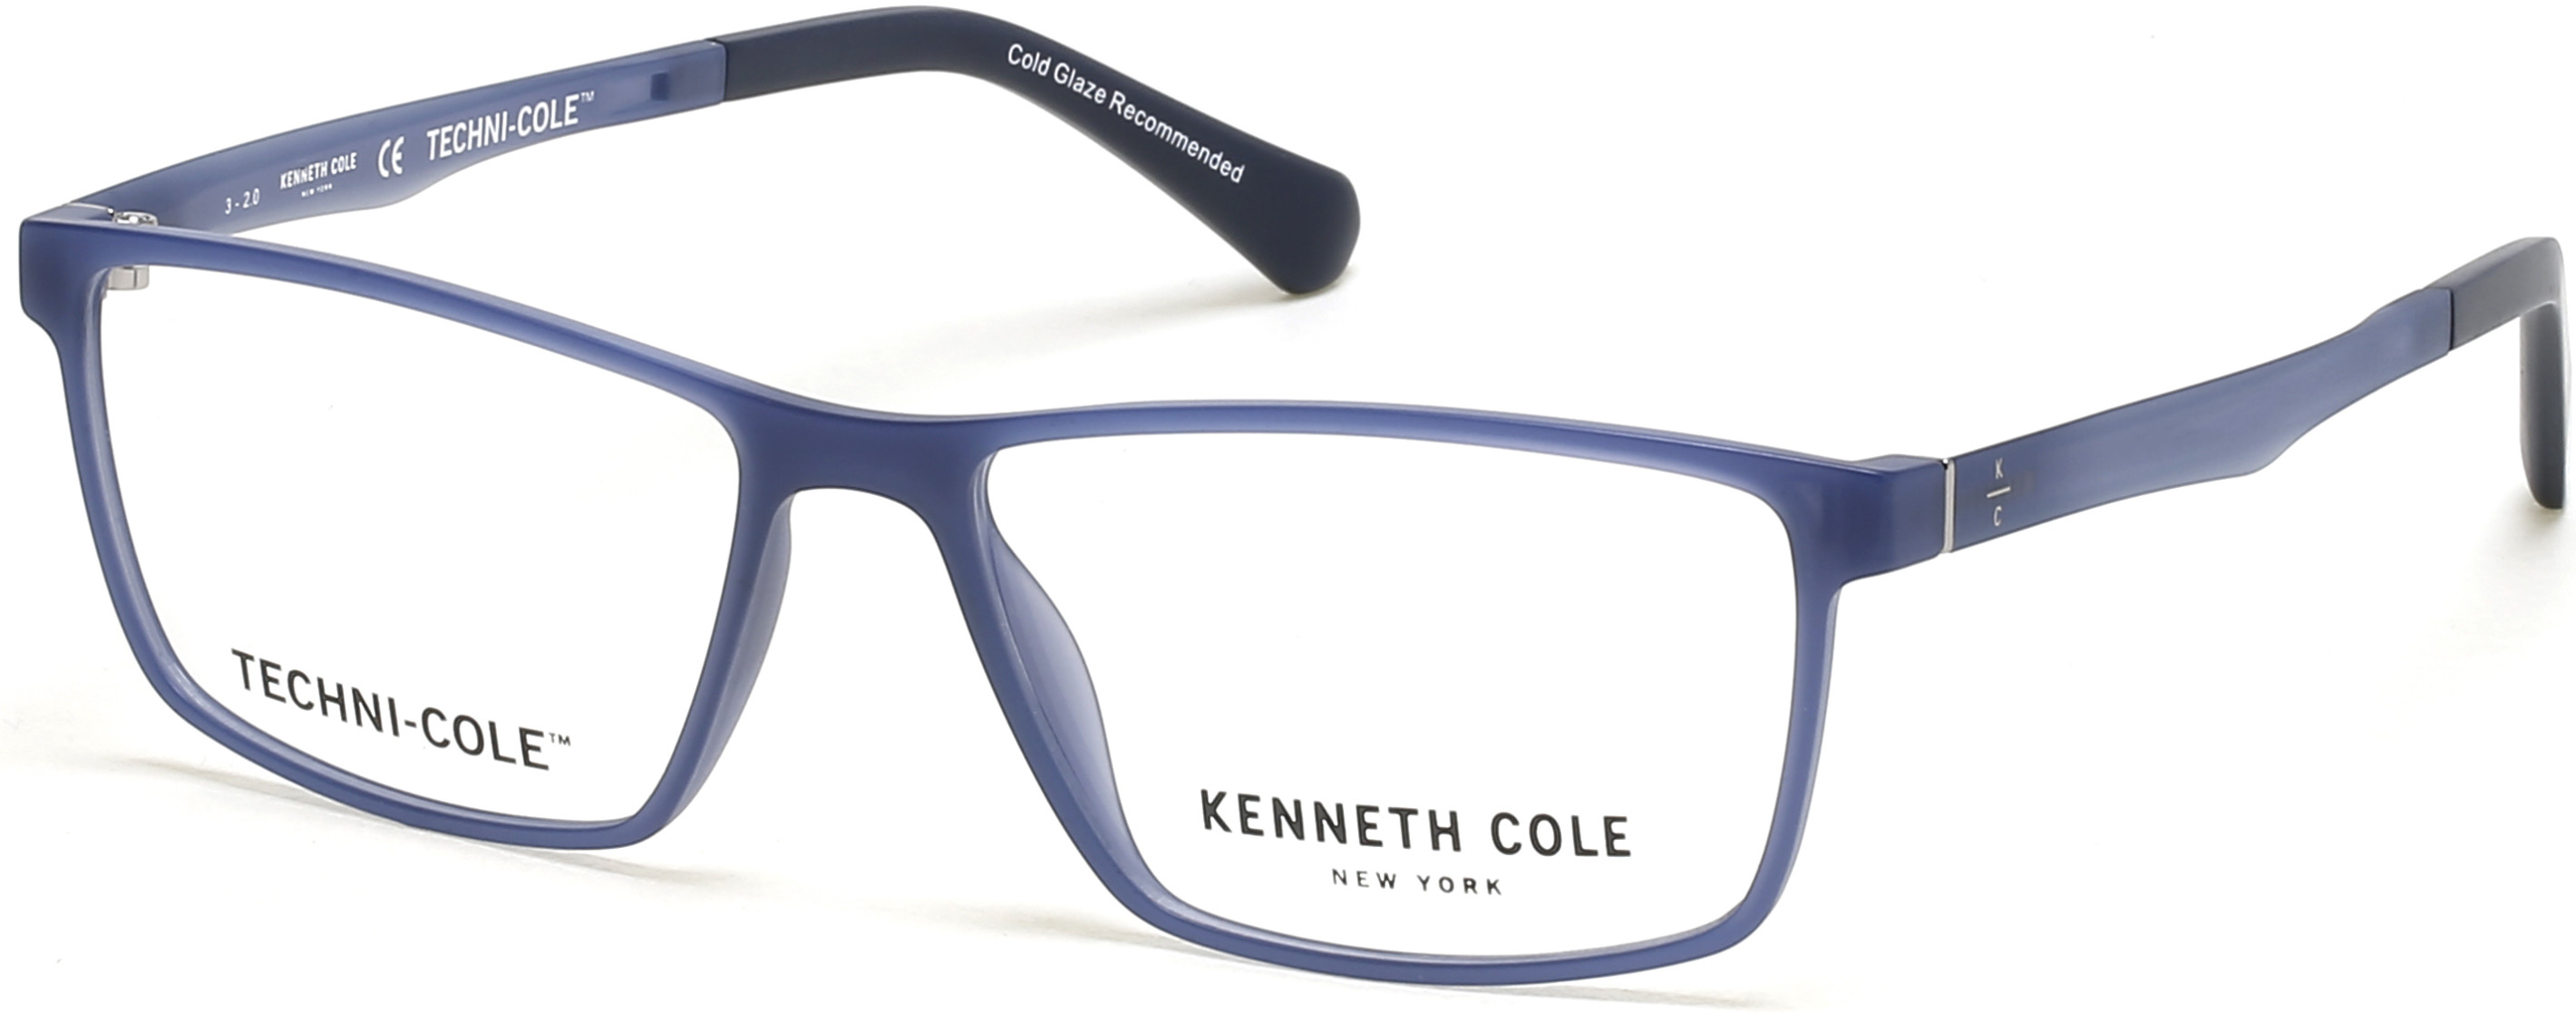 KENNETH COLE NY 0318 091